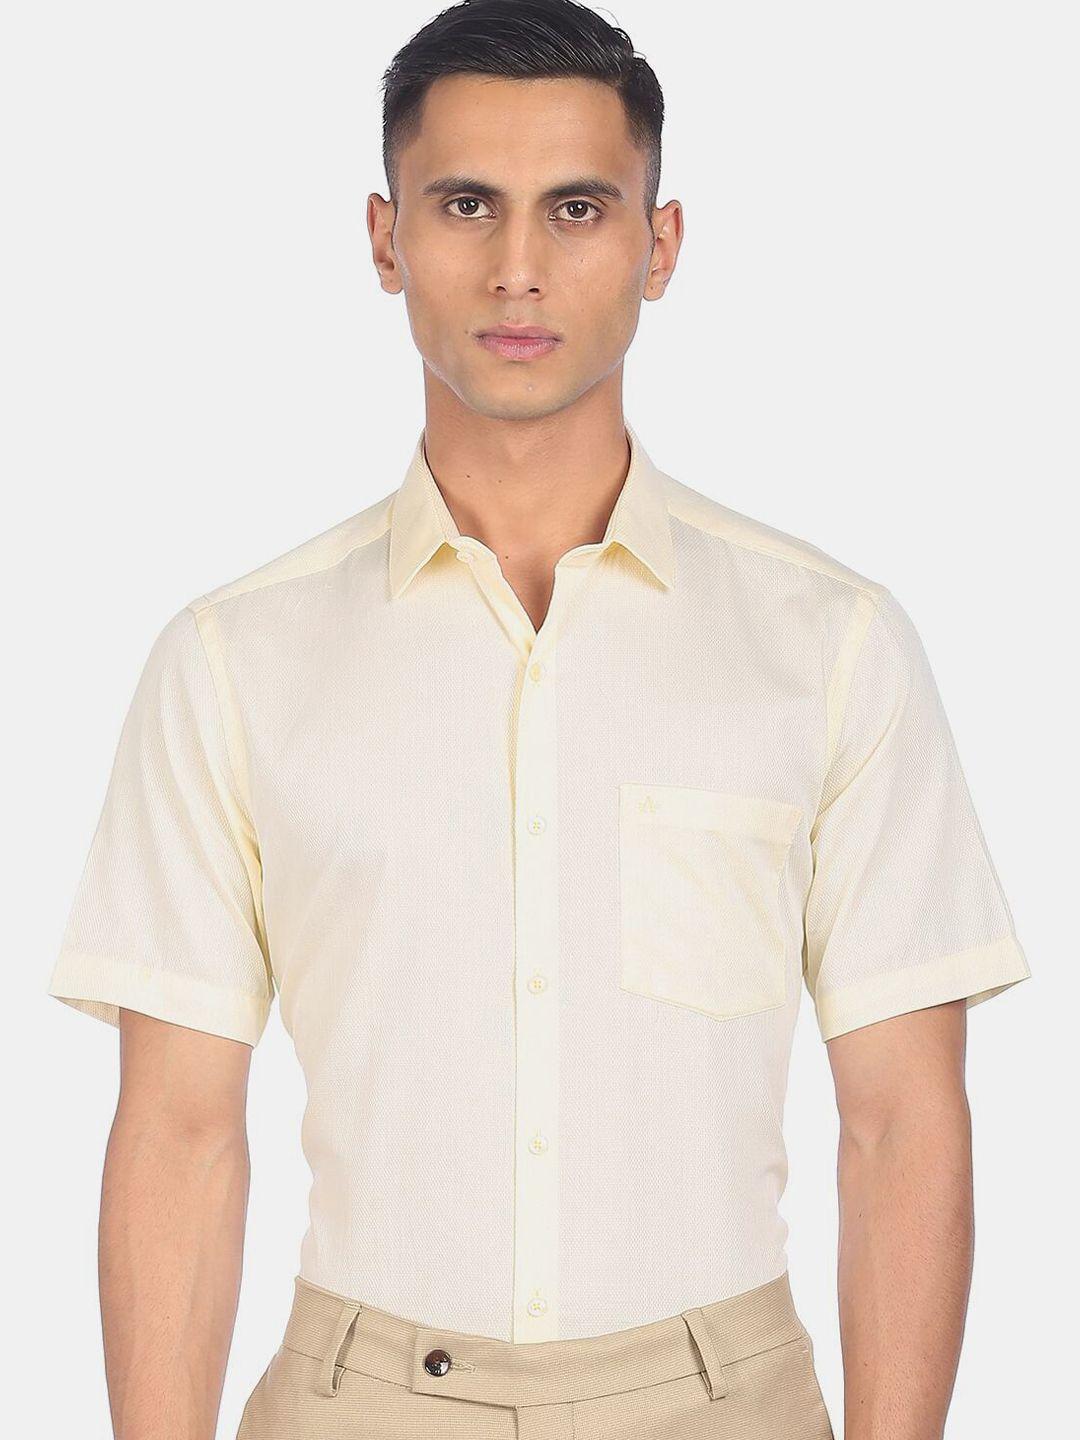 arrow men yellow patterned casual pure cotton shirt